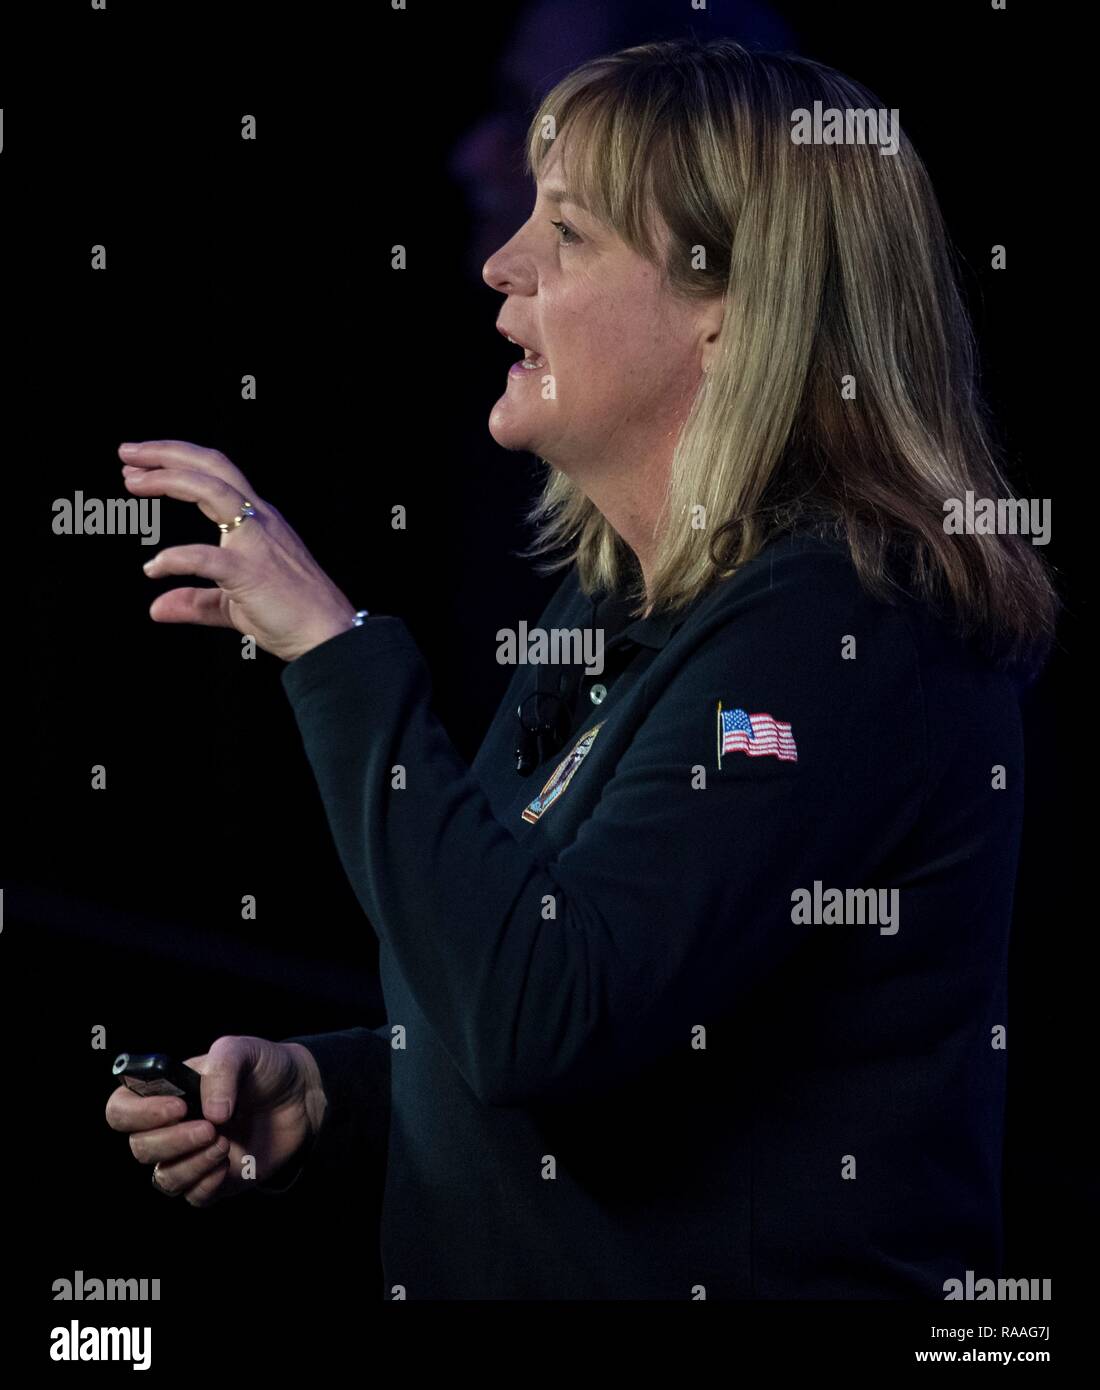 New Horizons co-investigator Cathy Olkin of the Southwest Research Institute during the press conference prior to the expected flyby of Ultima Thule by the spacecraft at Johns Hopkins University Applied Physics Laboratory December 31, 2018 in Laurel, Maryland. The flyby by the space probe occurred 6.5bn km (4bn miles) away, making it the most distant ever exploration of an object in our Solar System. Stock Photo